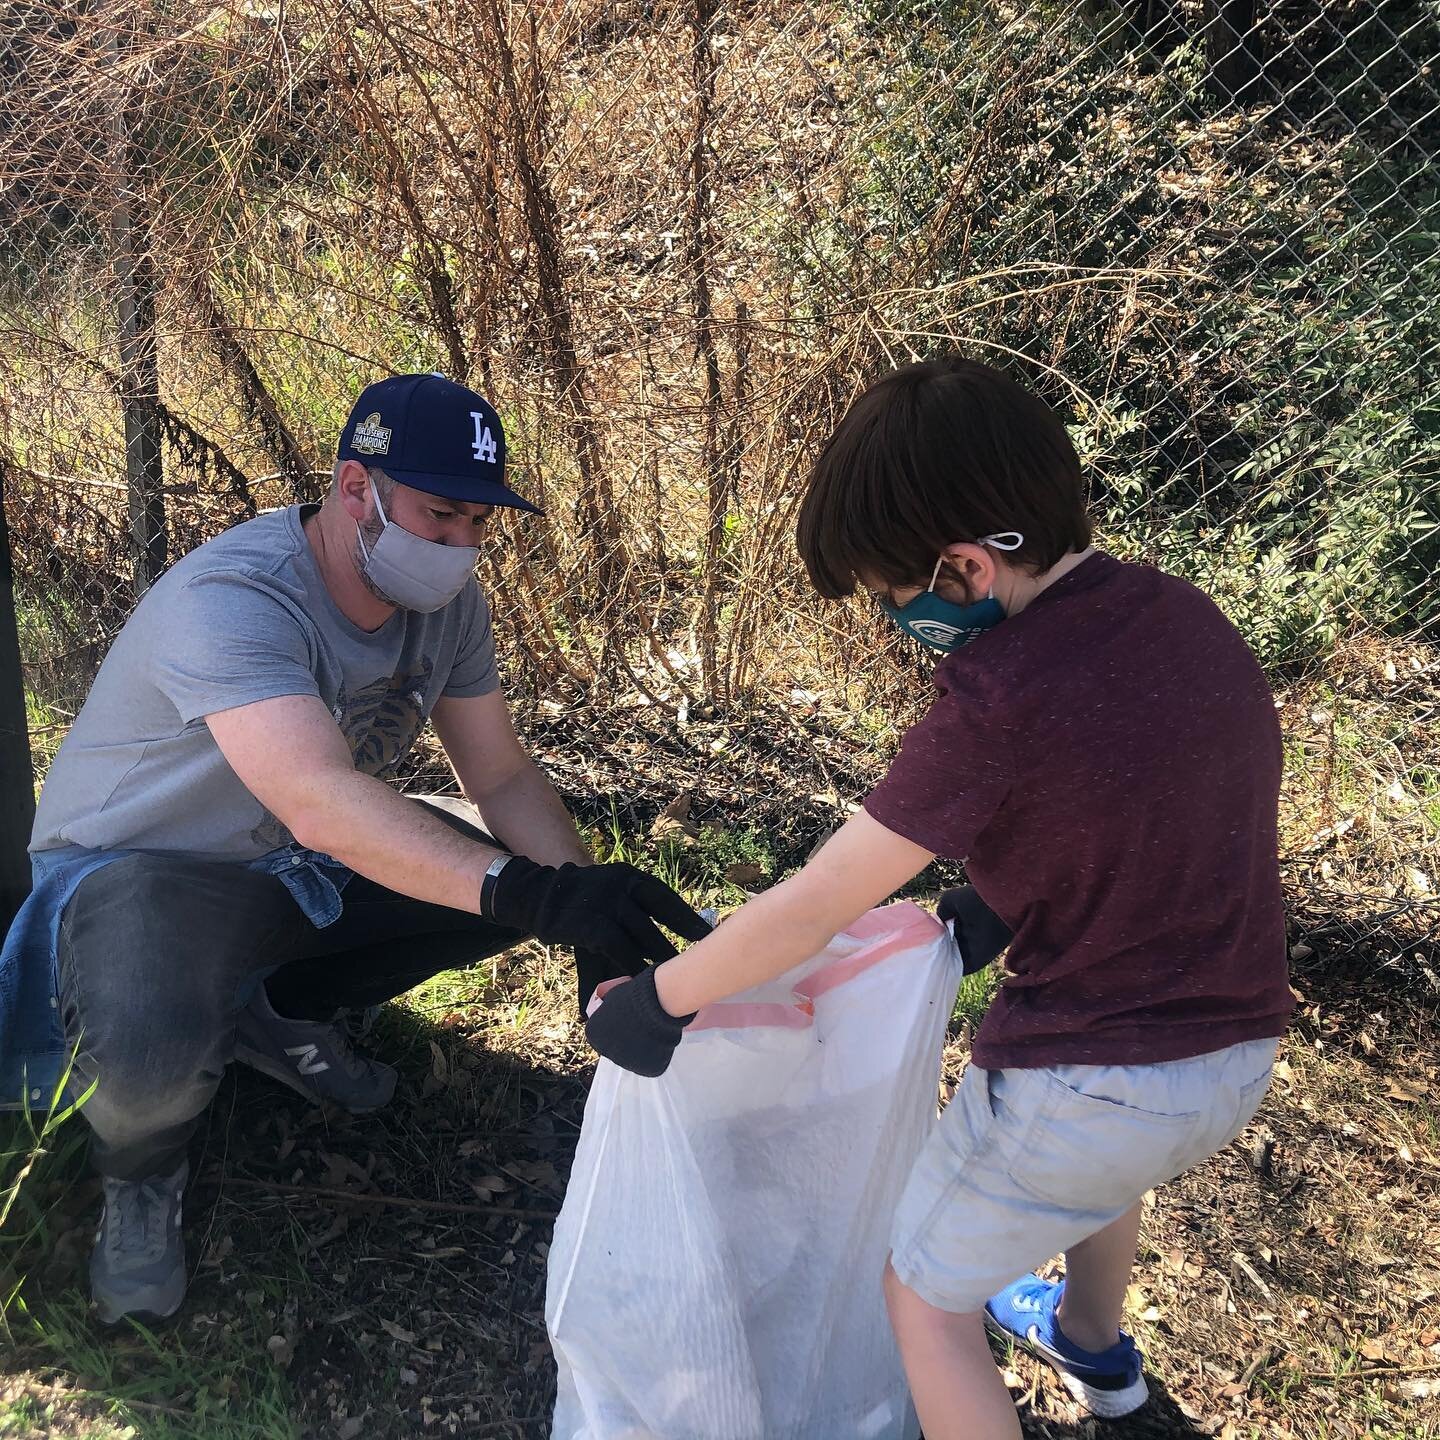 Happy Valentine&rsquo;s Day, Elysian Valley! Three days of cleanup says we love you 💖❤️💖 Best of all, we met some wonderful people - neighbors, bird-watchers, walkers and riders who came out to take care of our community.  Curbside and path-side it